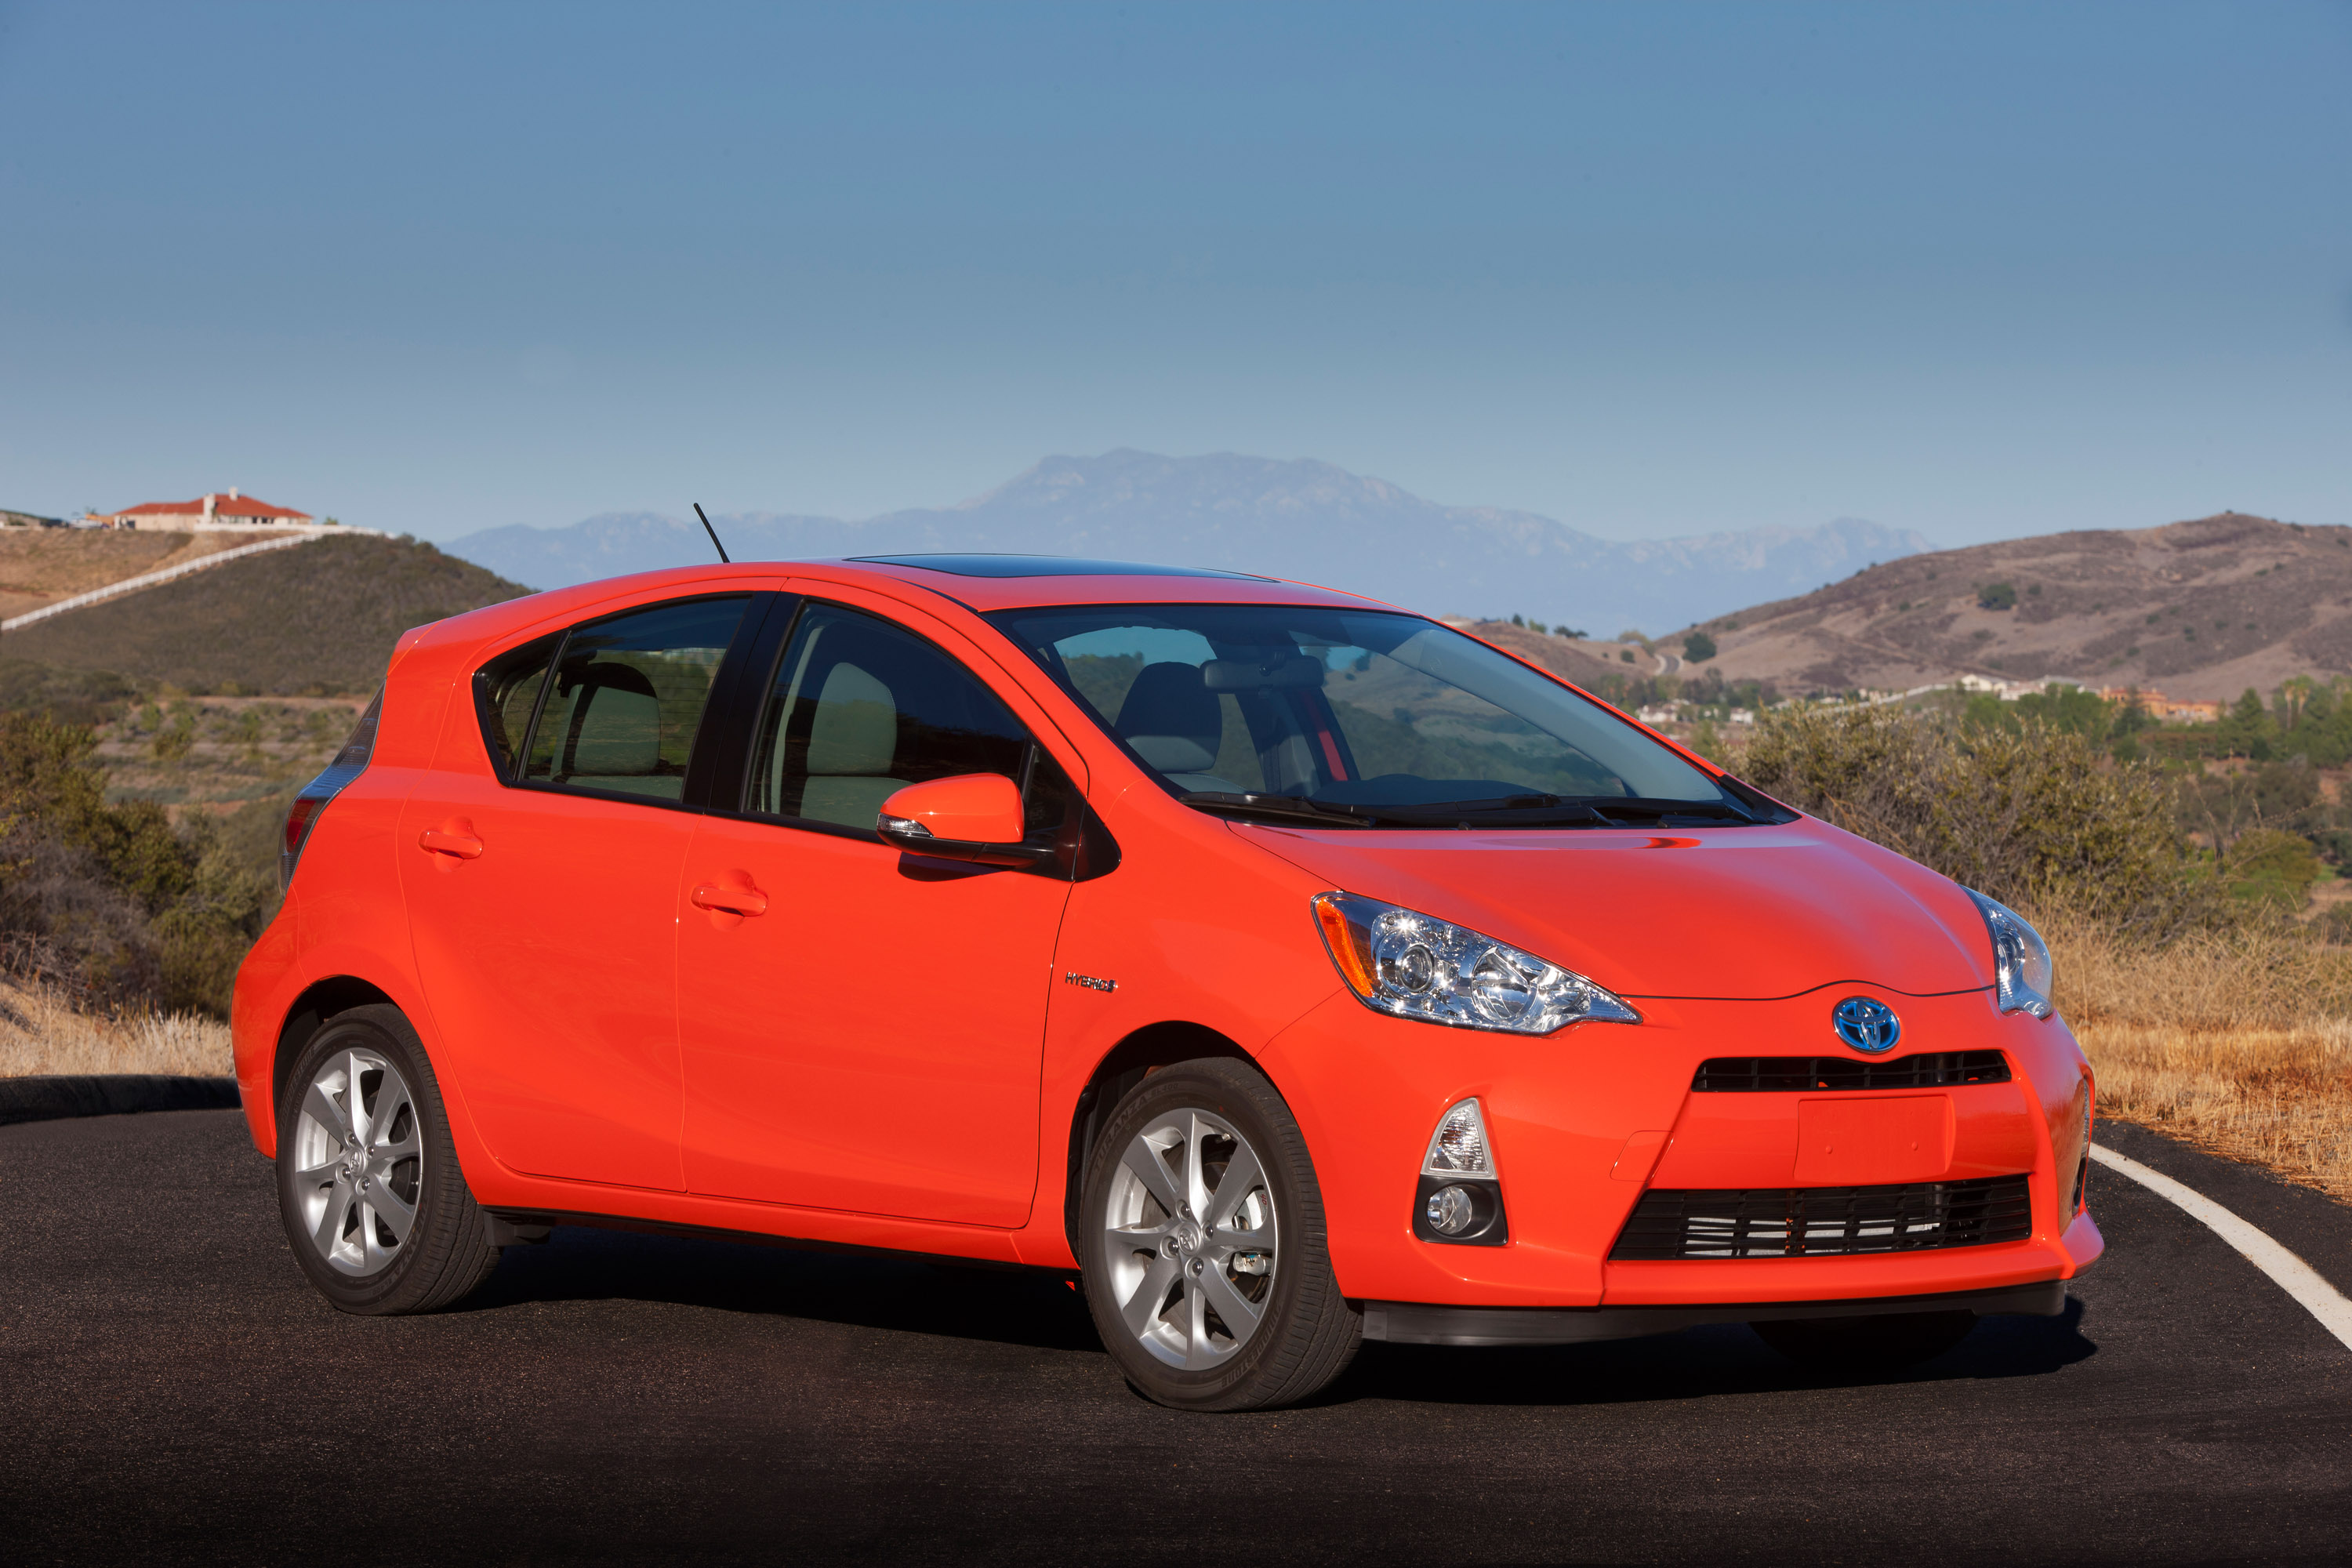 2014 Toyota Prius c Offers 53 MPG City Fuel Economy, Highest of Any Vehicle  Without a Plug - Toyota USA Newsroom